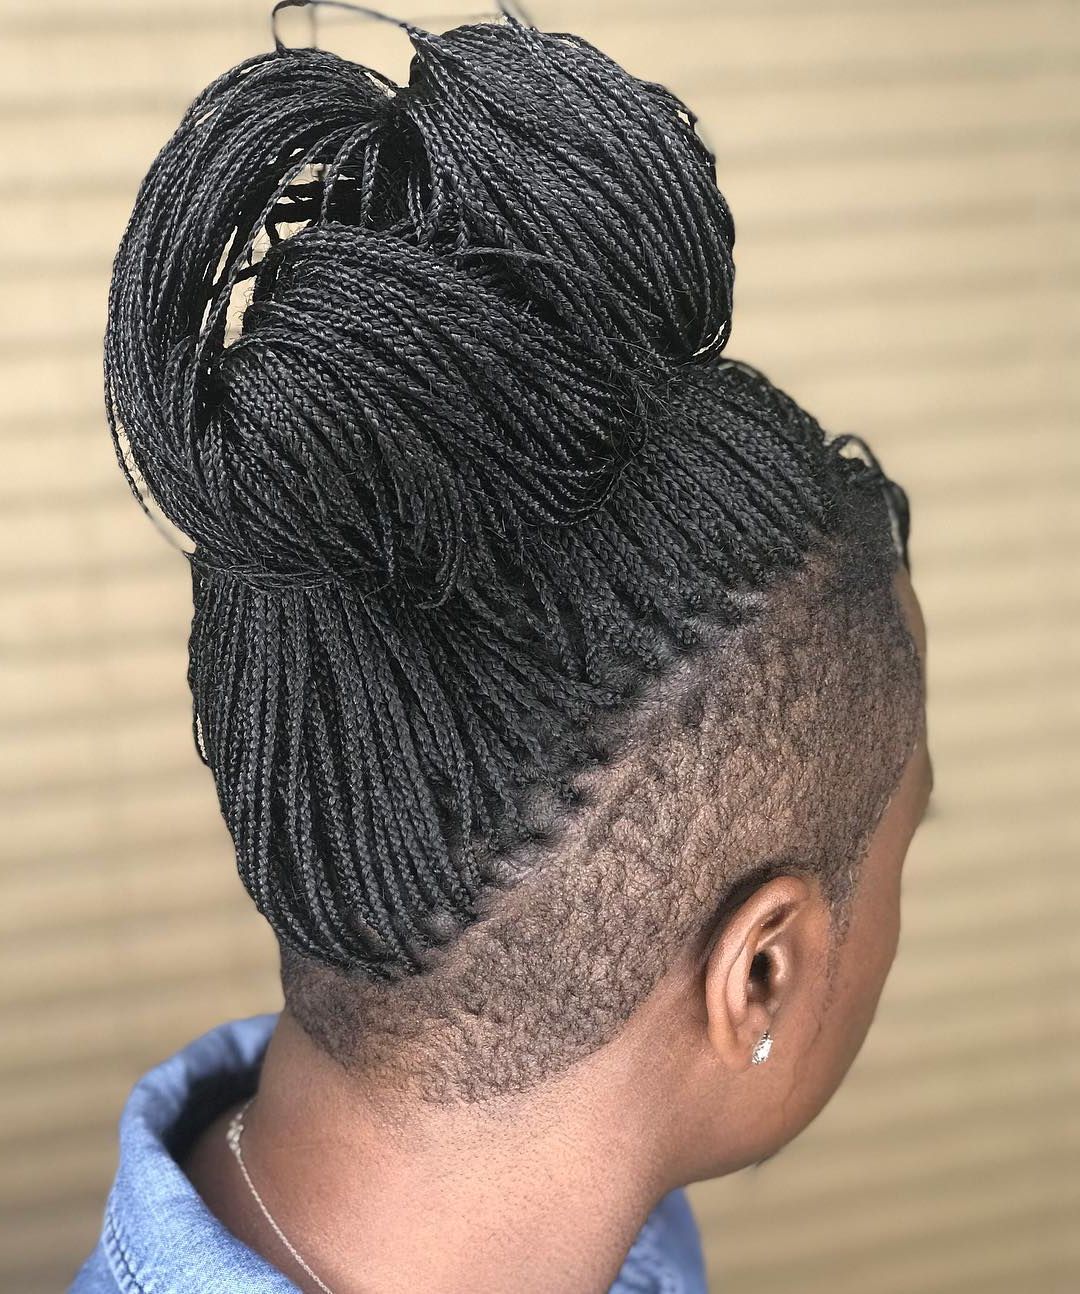 20 Superb Braids With Shaved Sides Worth Copying Pertaining To Recent Black Twists Micro Braids With Golden Highlights (Gallery 20 of 20)